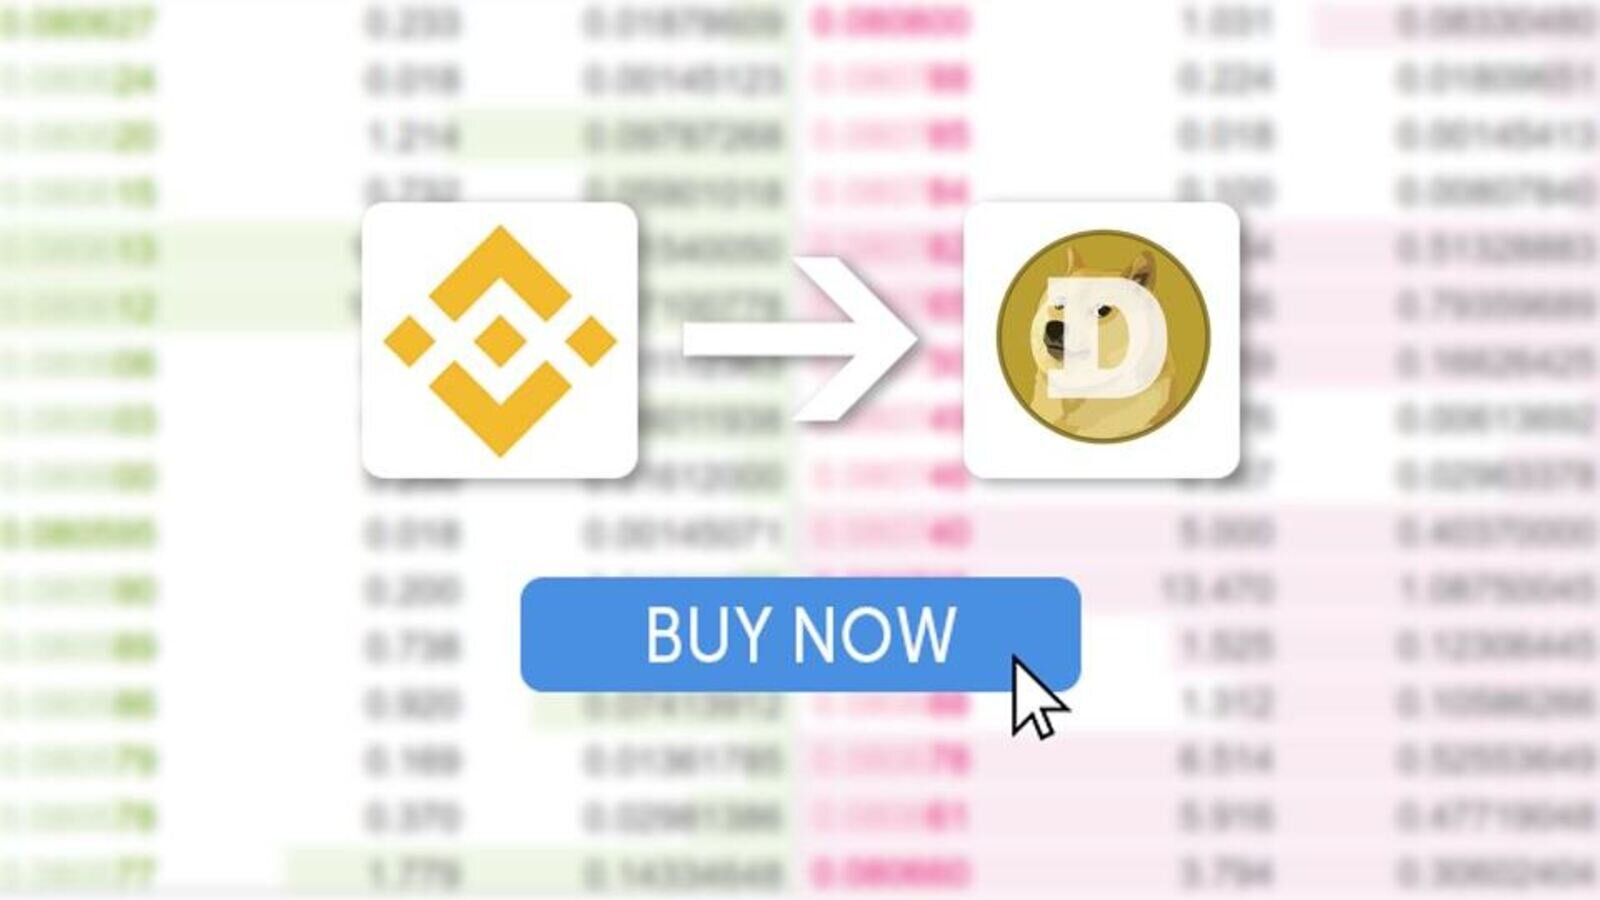 How to buy Dogecoin (DOGE) on Binance? | CoinCodex